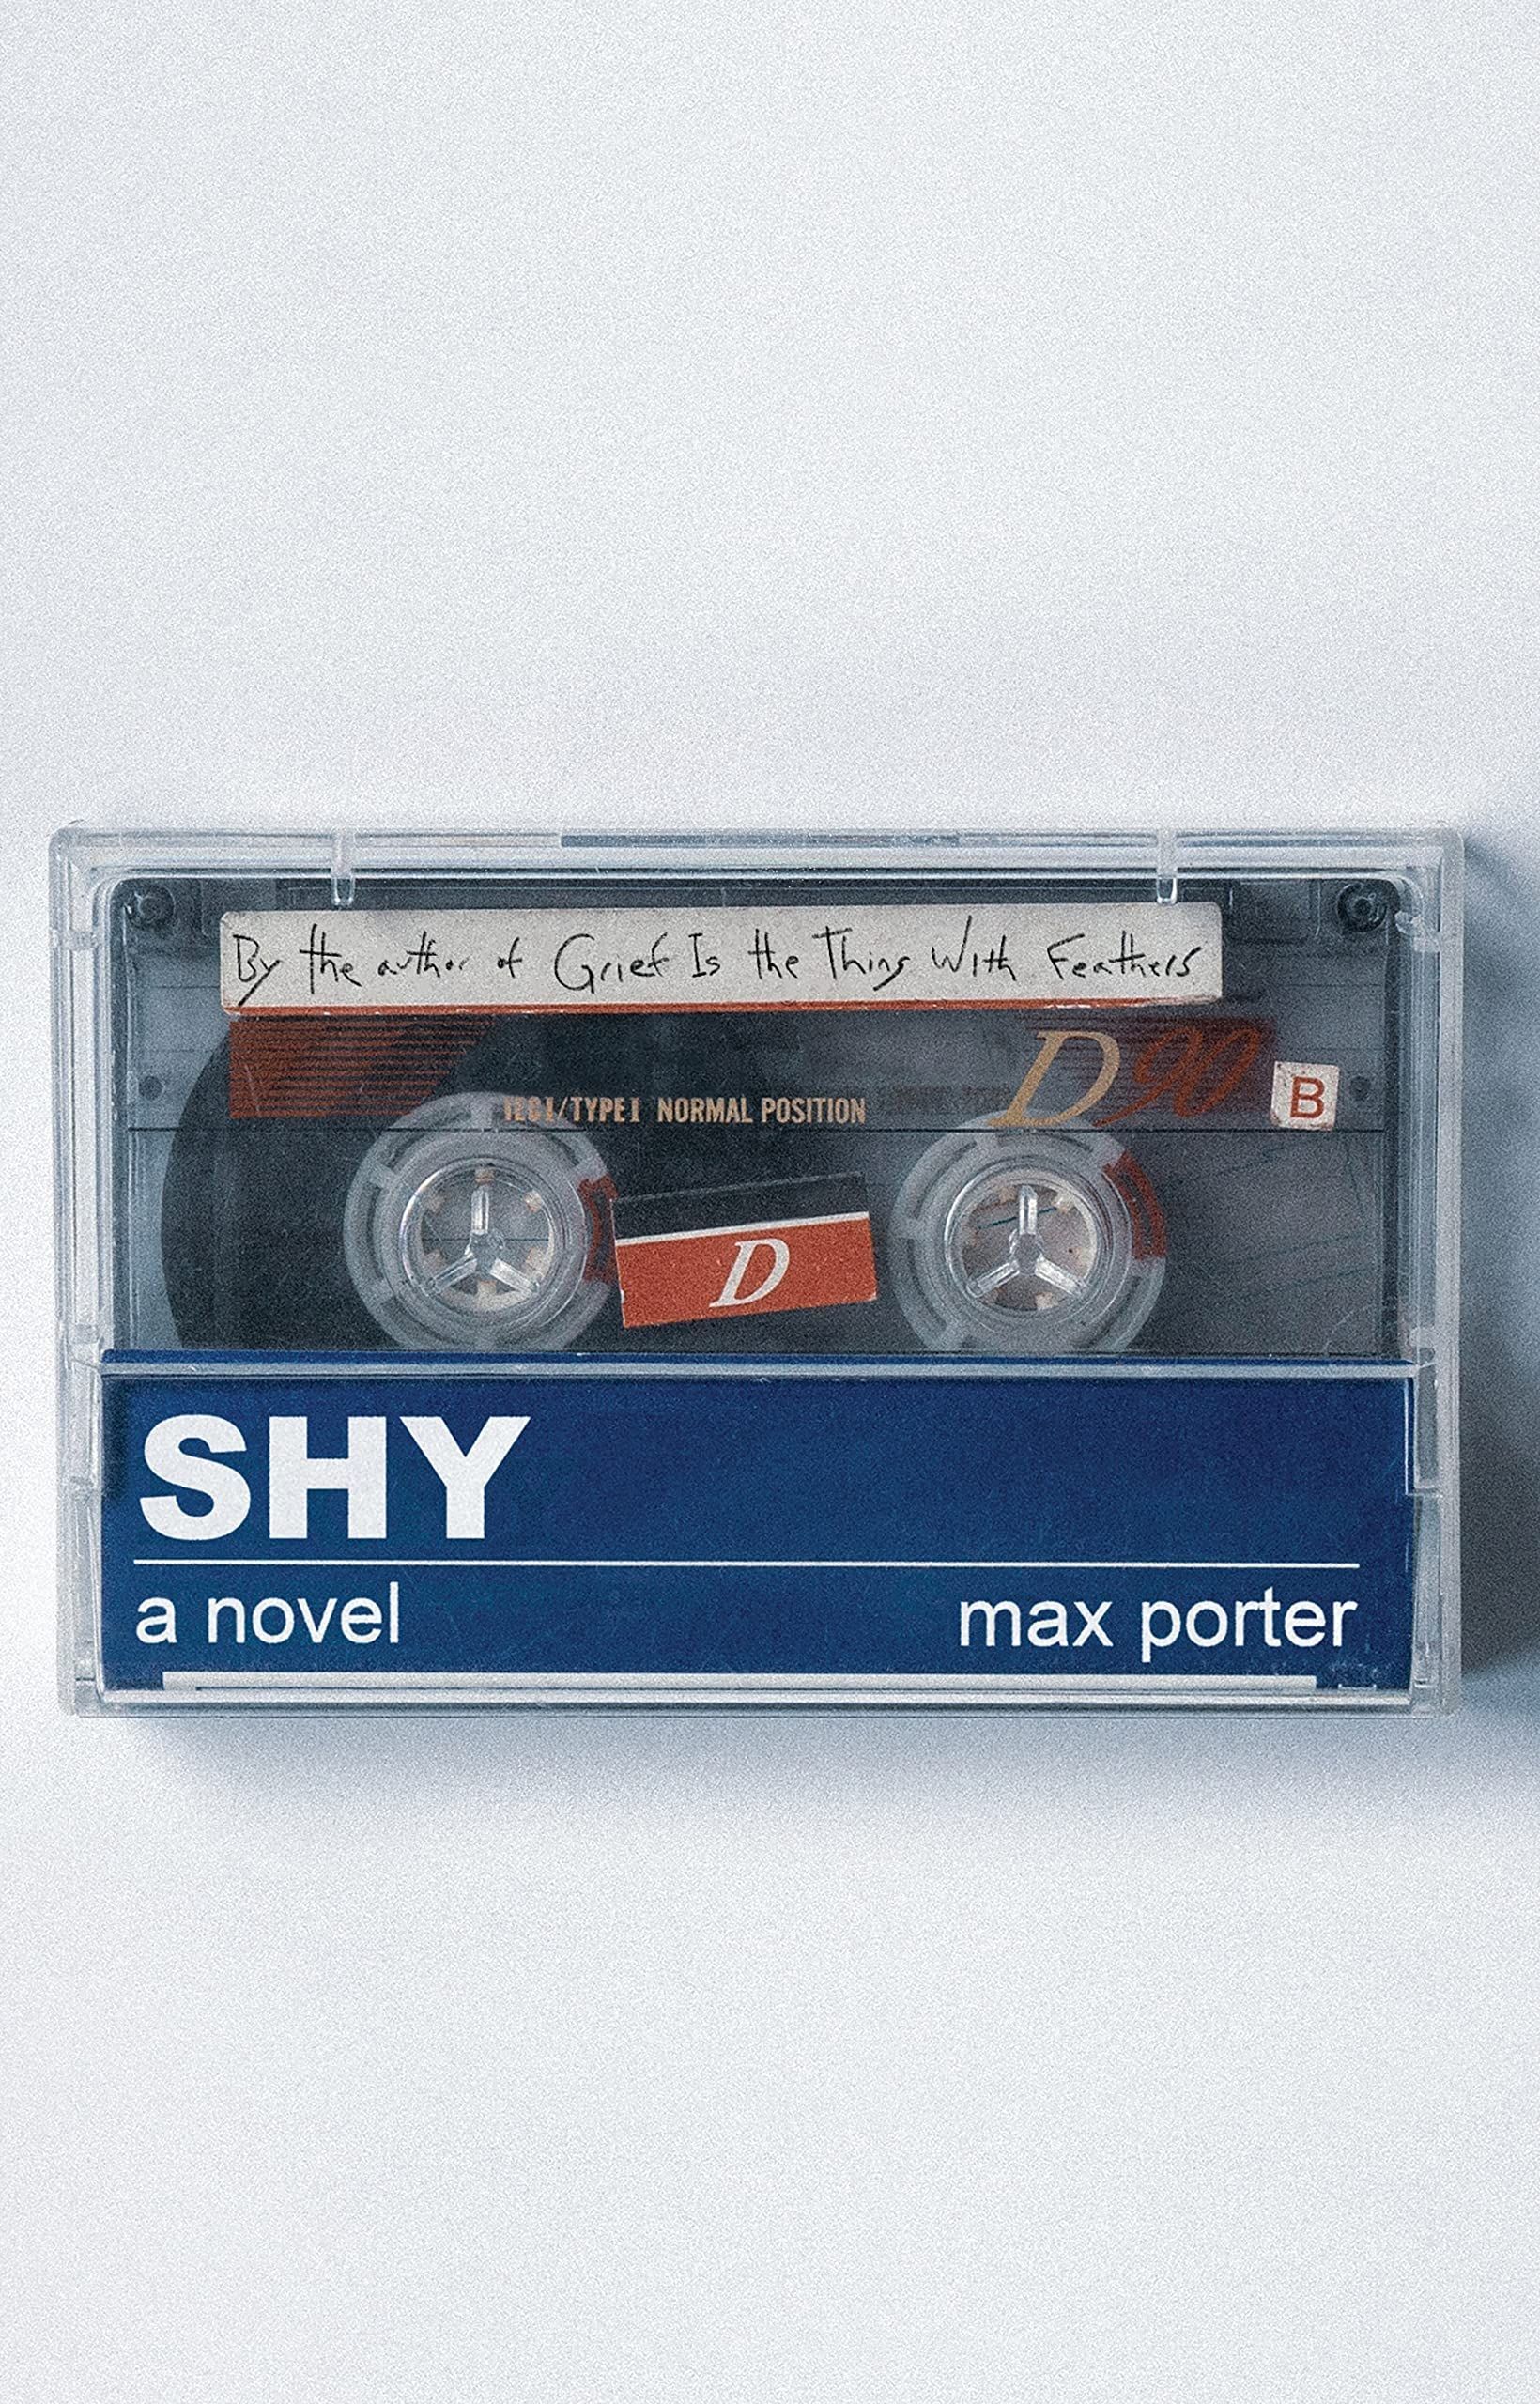 A Bewildering World: On Max Porter’s “Shy”